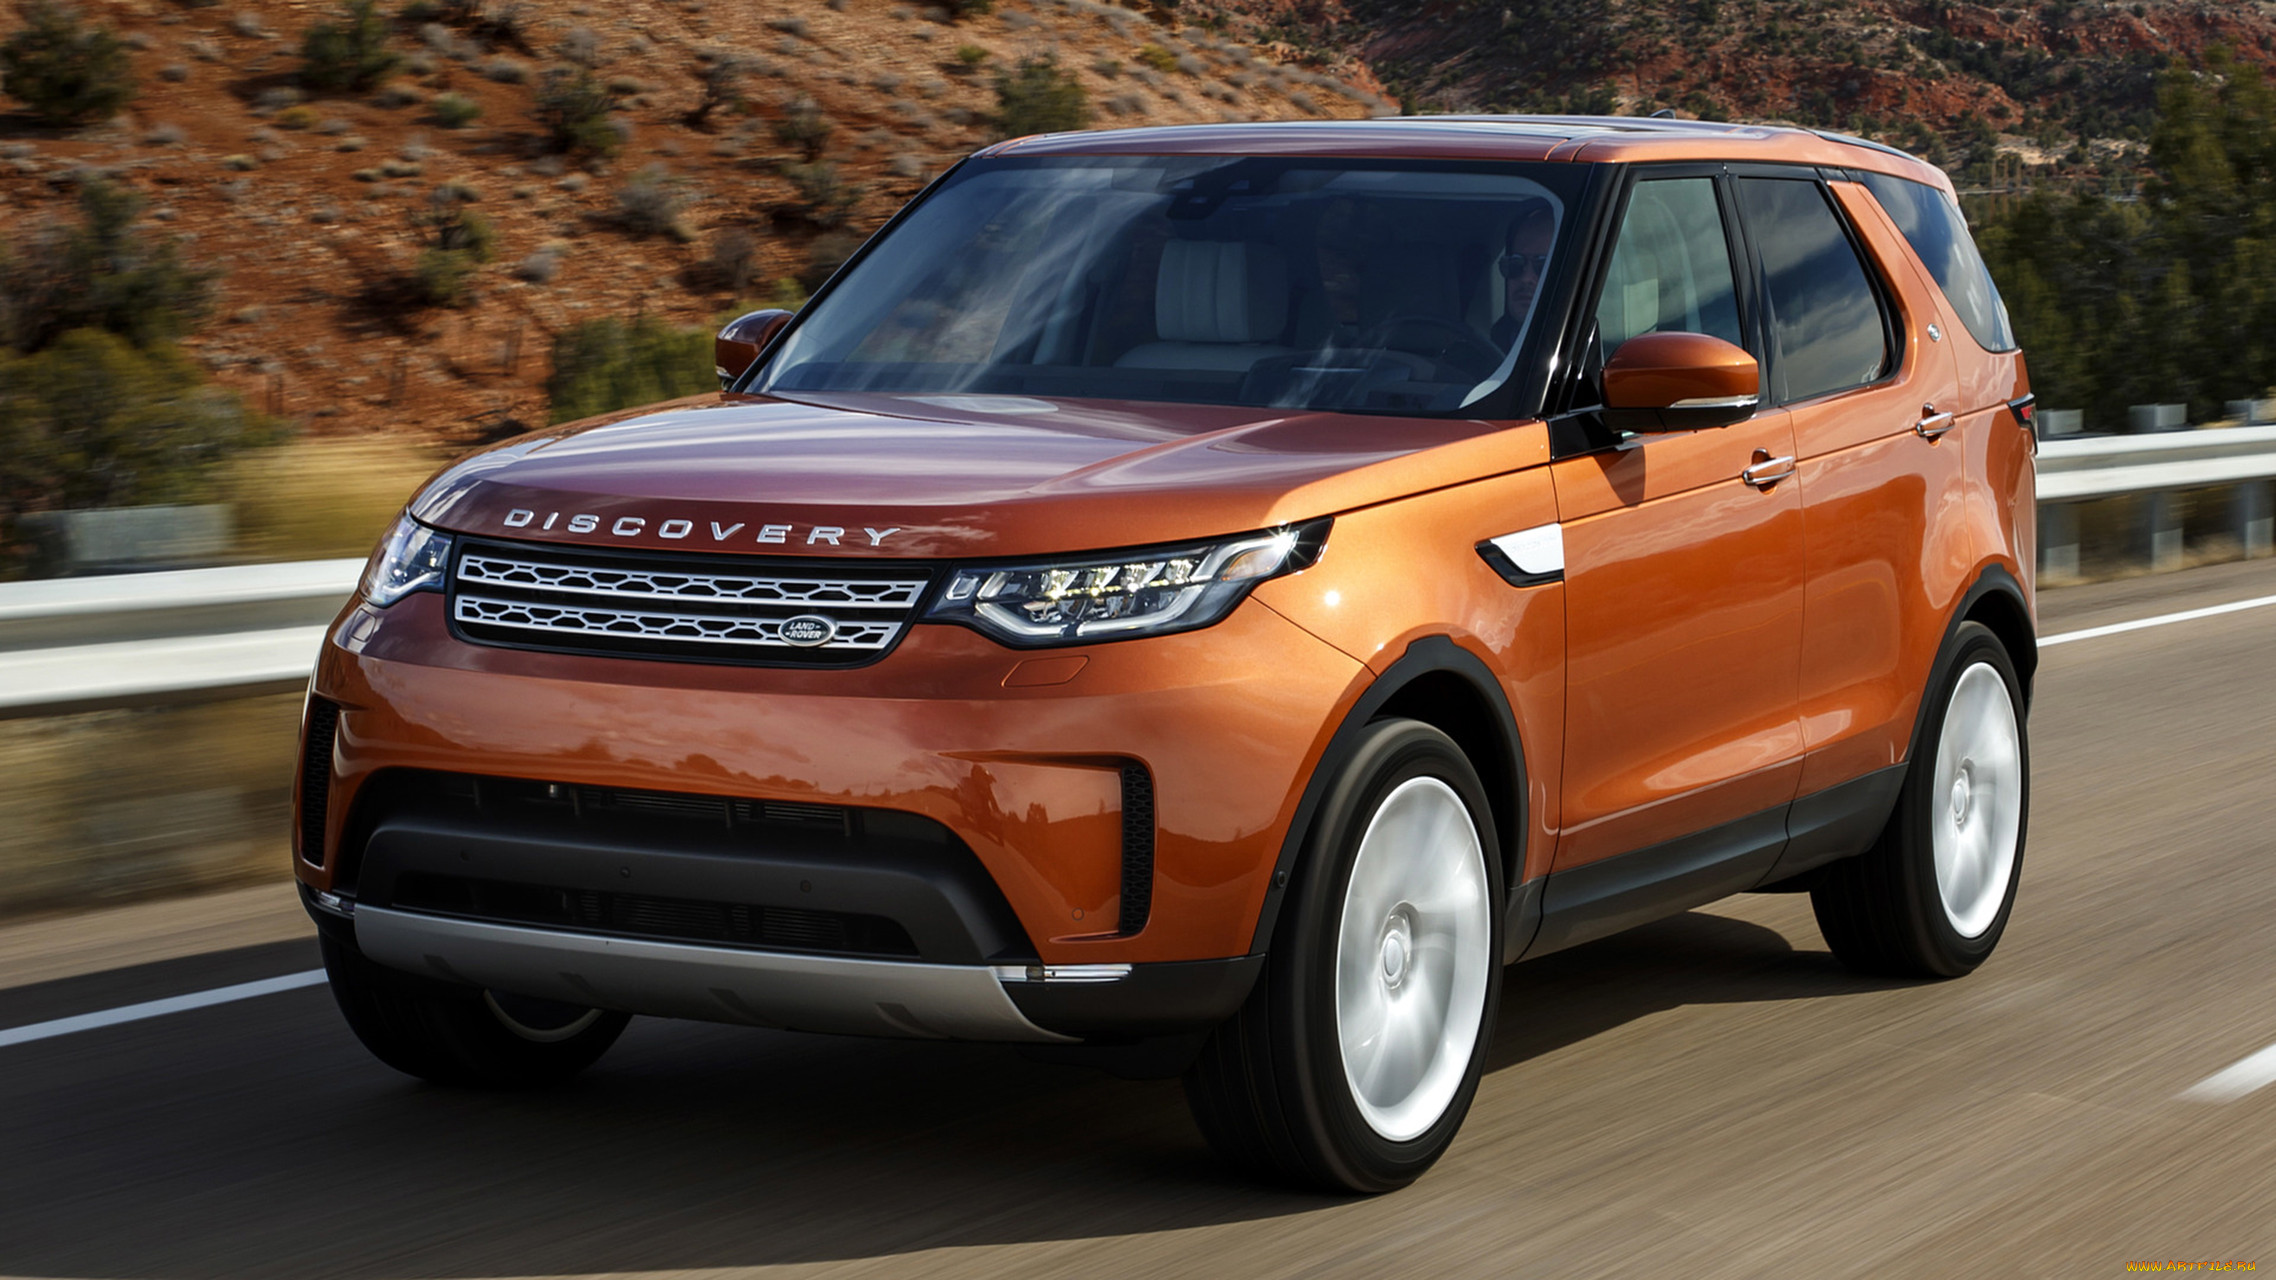 land-rover discovery hse-td6 2018, , land-rover, 2018, hse-td6, discovery